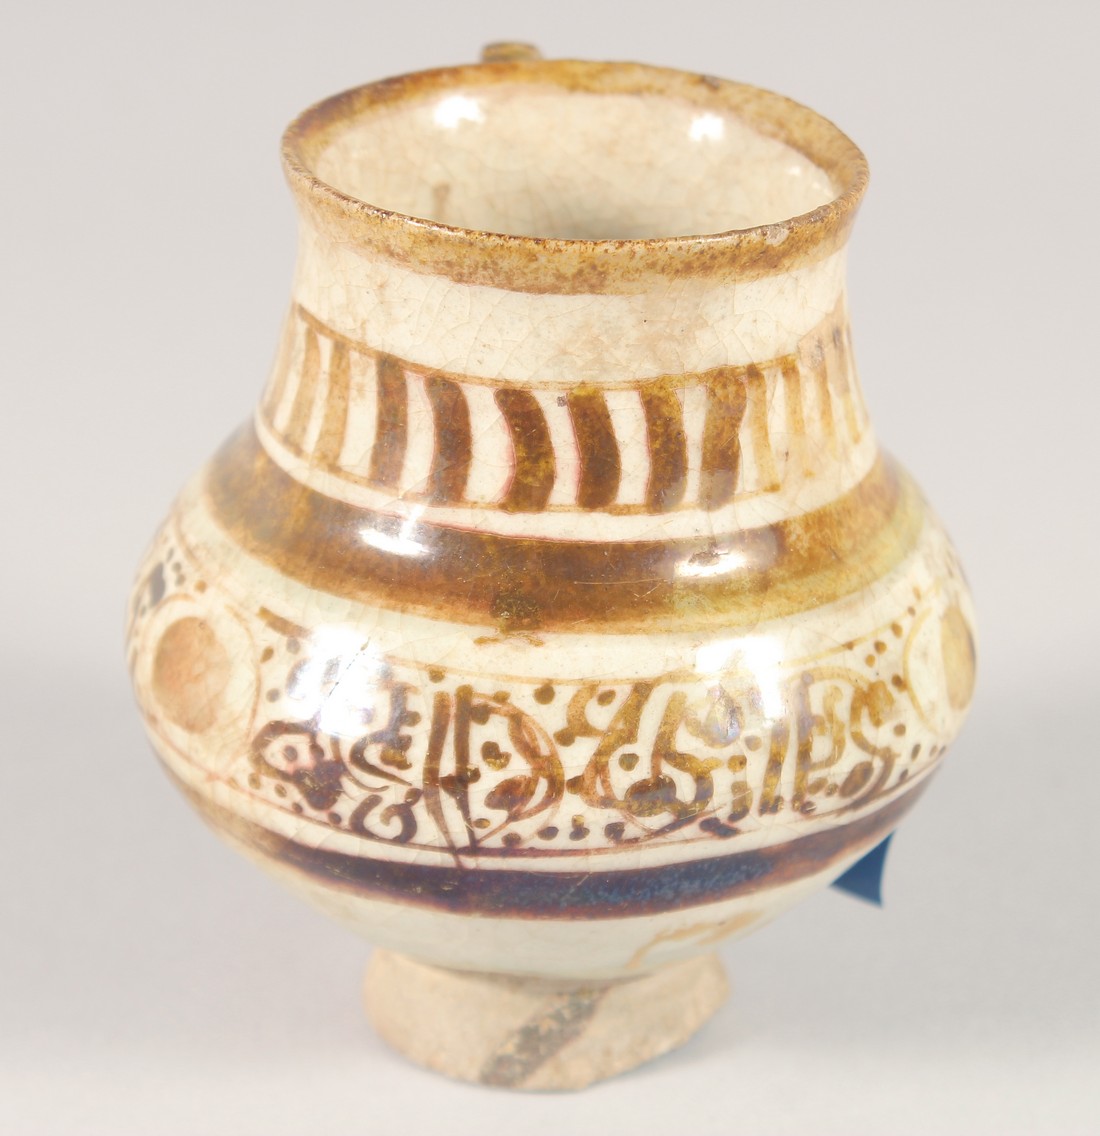 A SMALL KASHAN LUSTRE GLAZE POTTERY EWER, with provenance sticker; Christie's, 9cm high. - Image 4 of 7